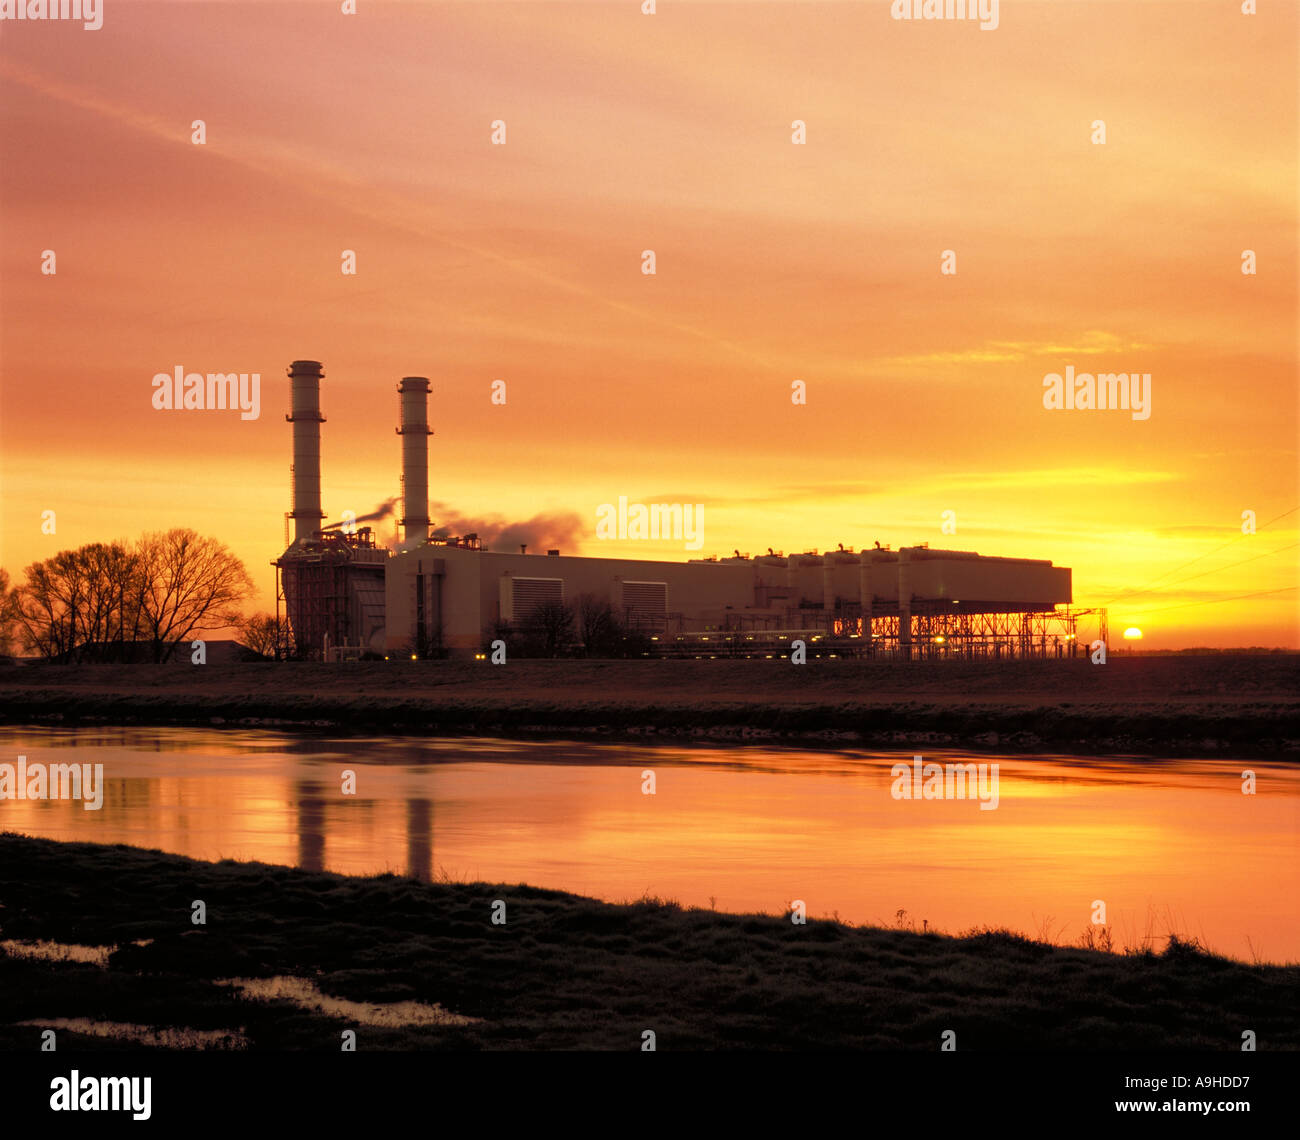 Sutton Bridge combined cycled gas fired and steam driven turbine power station, at dawn, situated beside River Nene at dawn,.Lincolnshire, UK Stock Photo